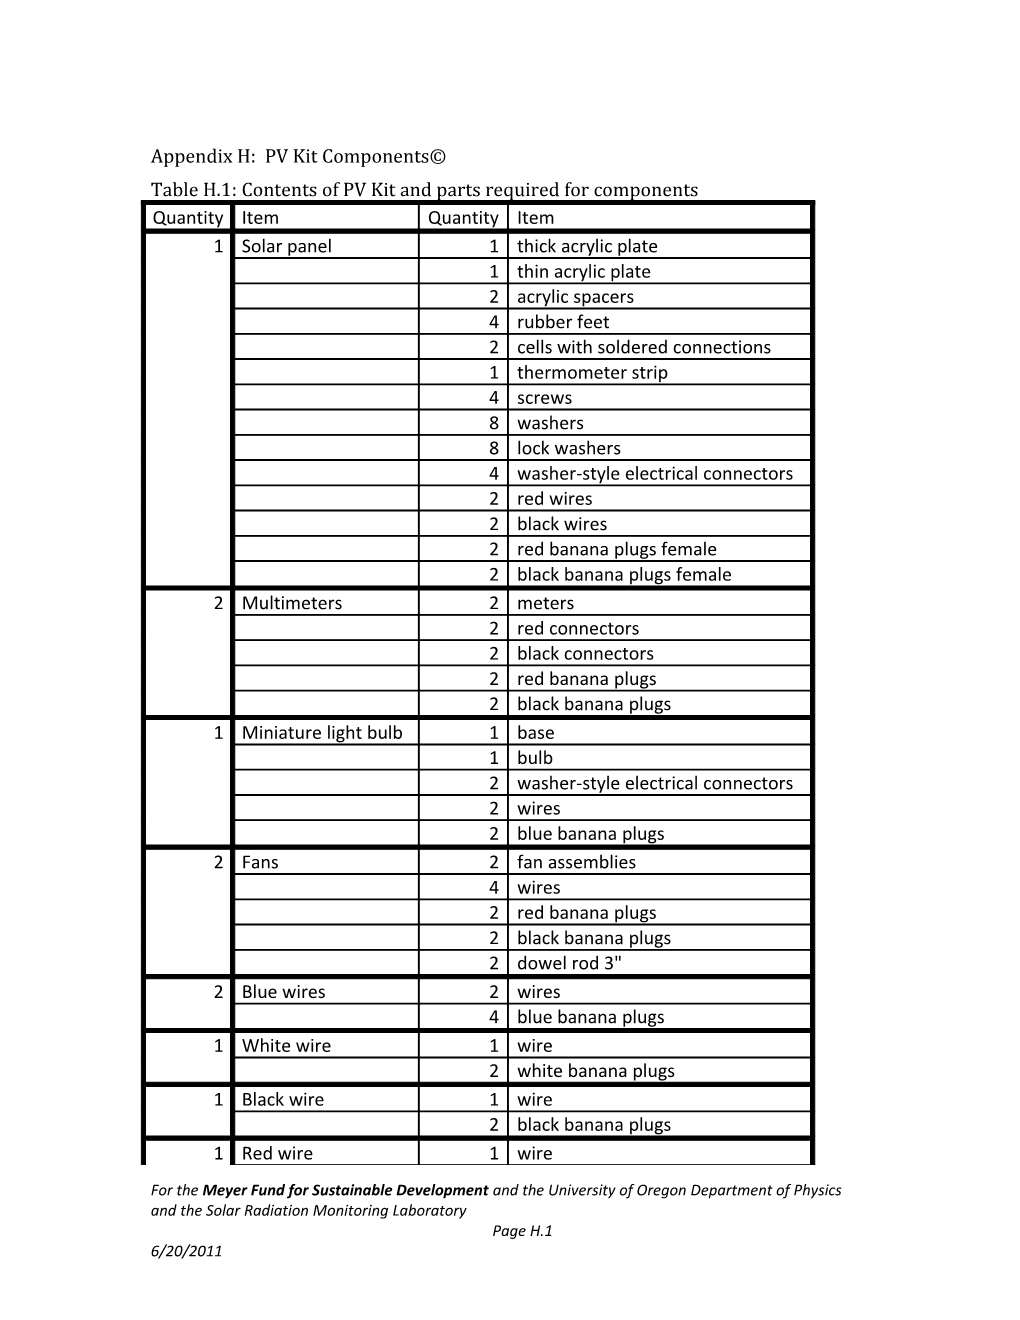 Table H.1: Contents of PV Kit and Parts Required for Components